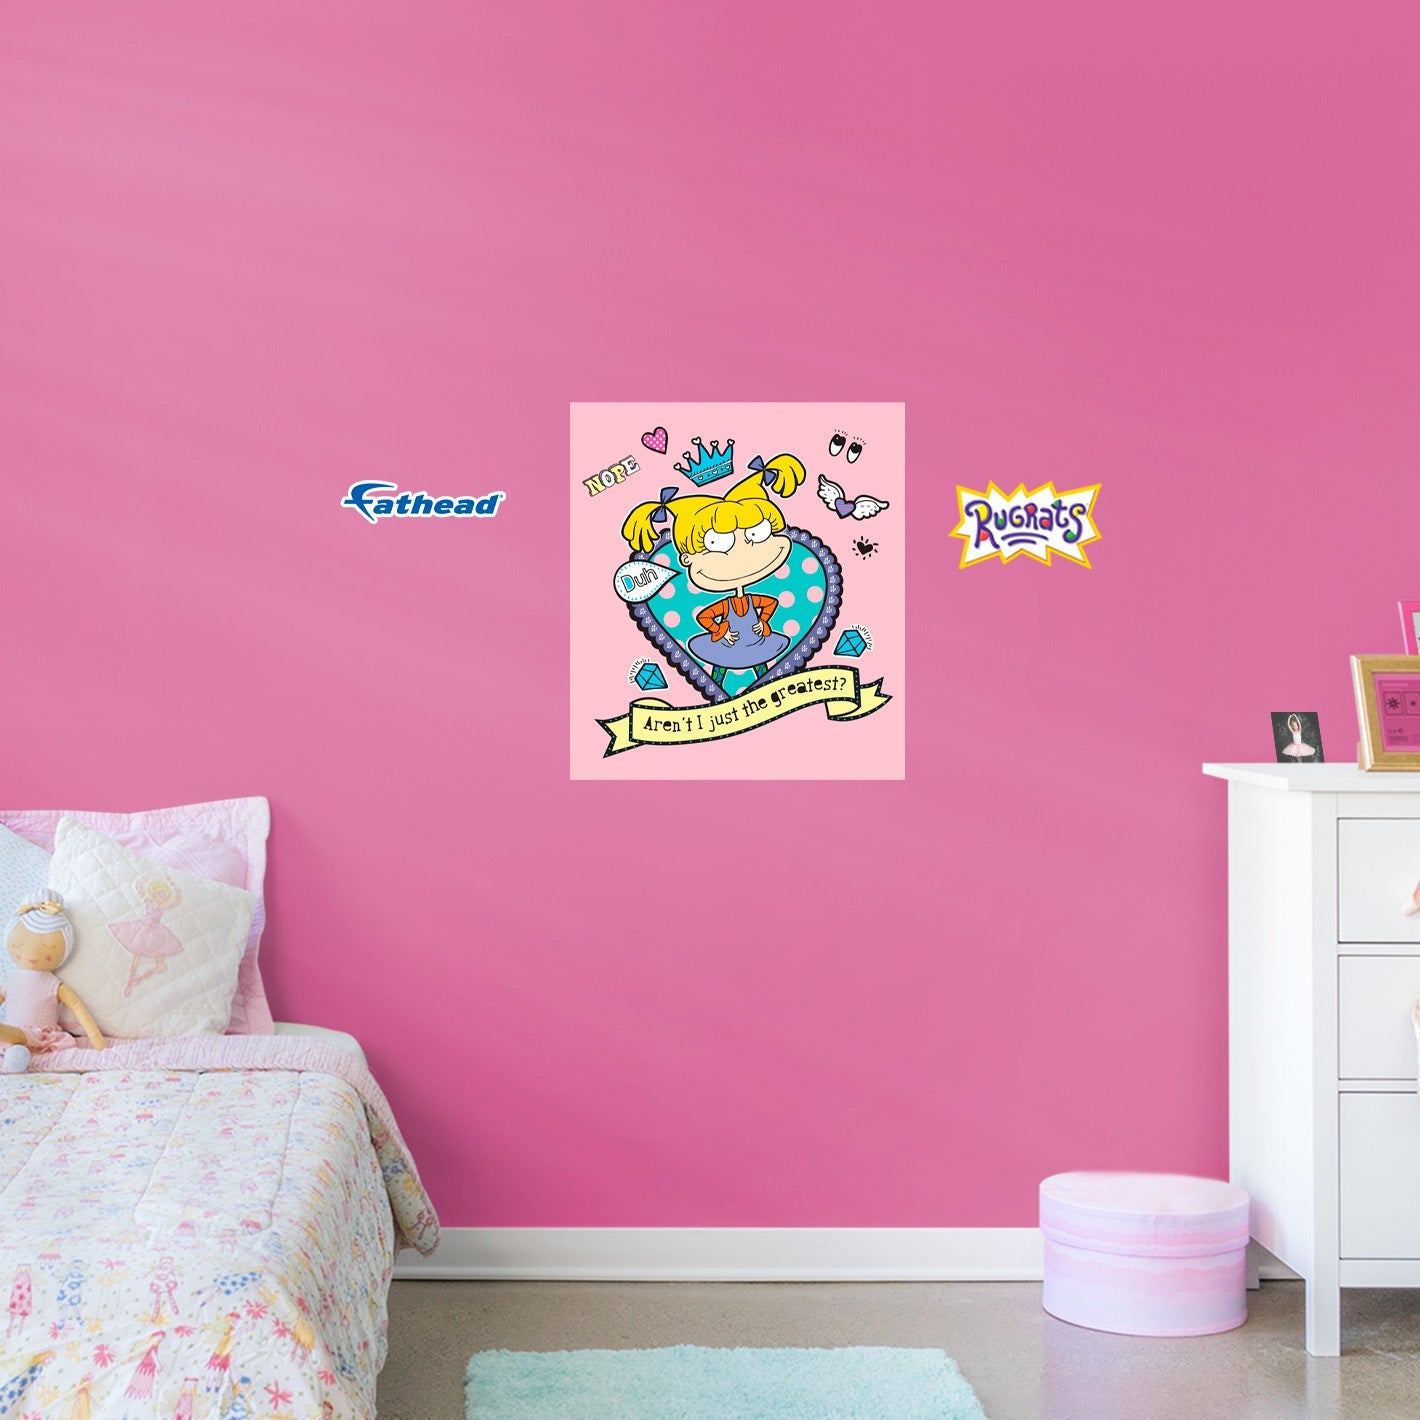 Rugrats: Aren't I Just The Greatest Poster - Officially Licensed Nickelodeon Removable Adhesive Decal